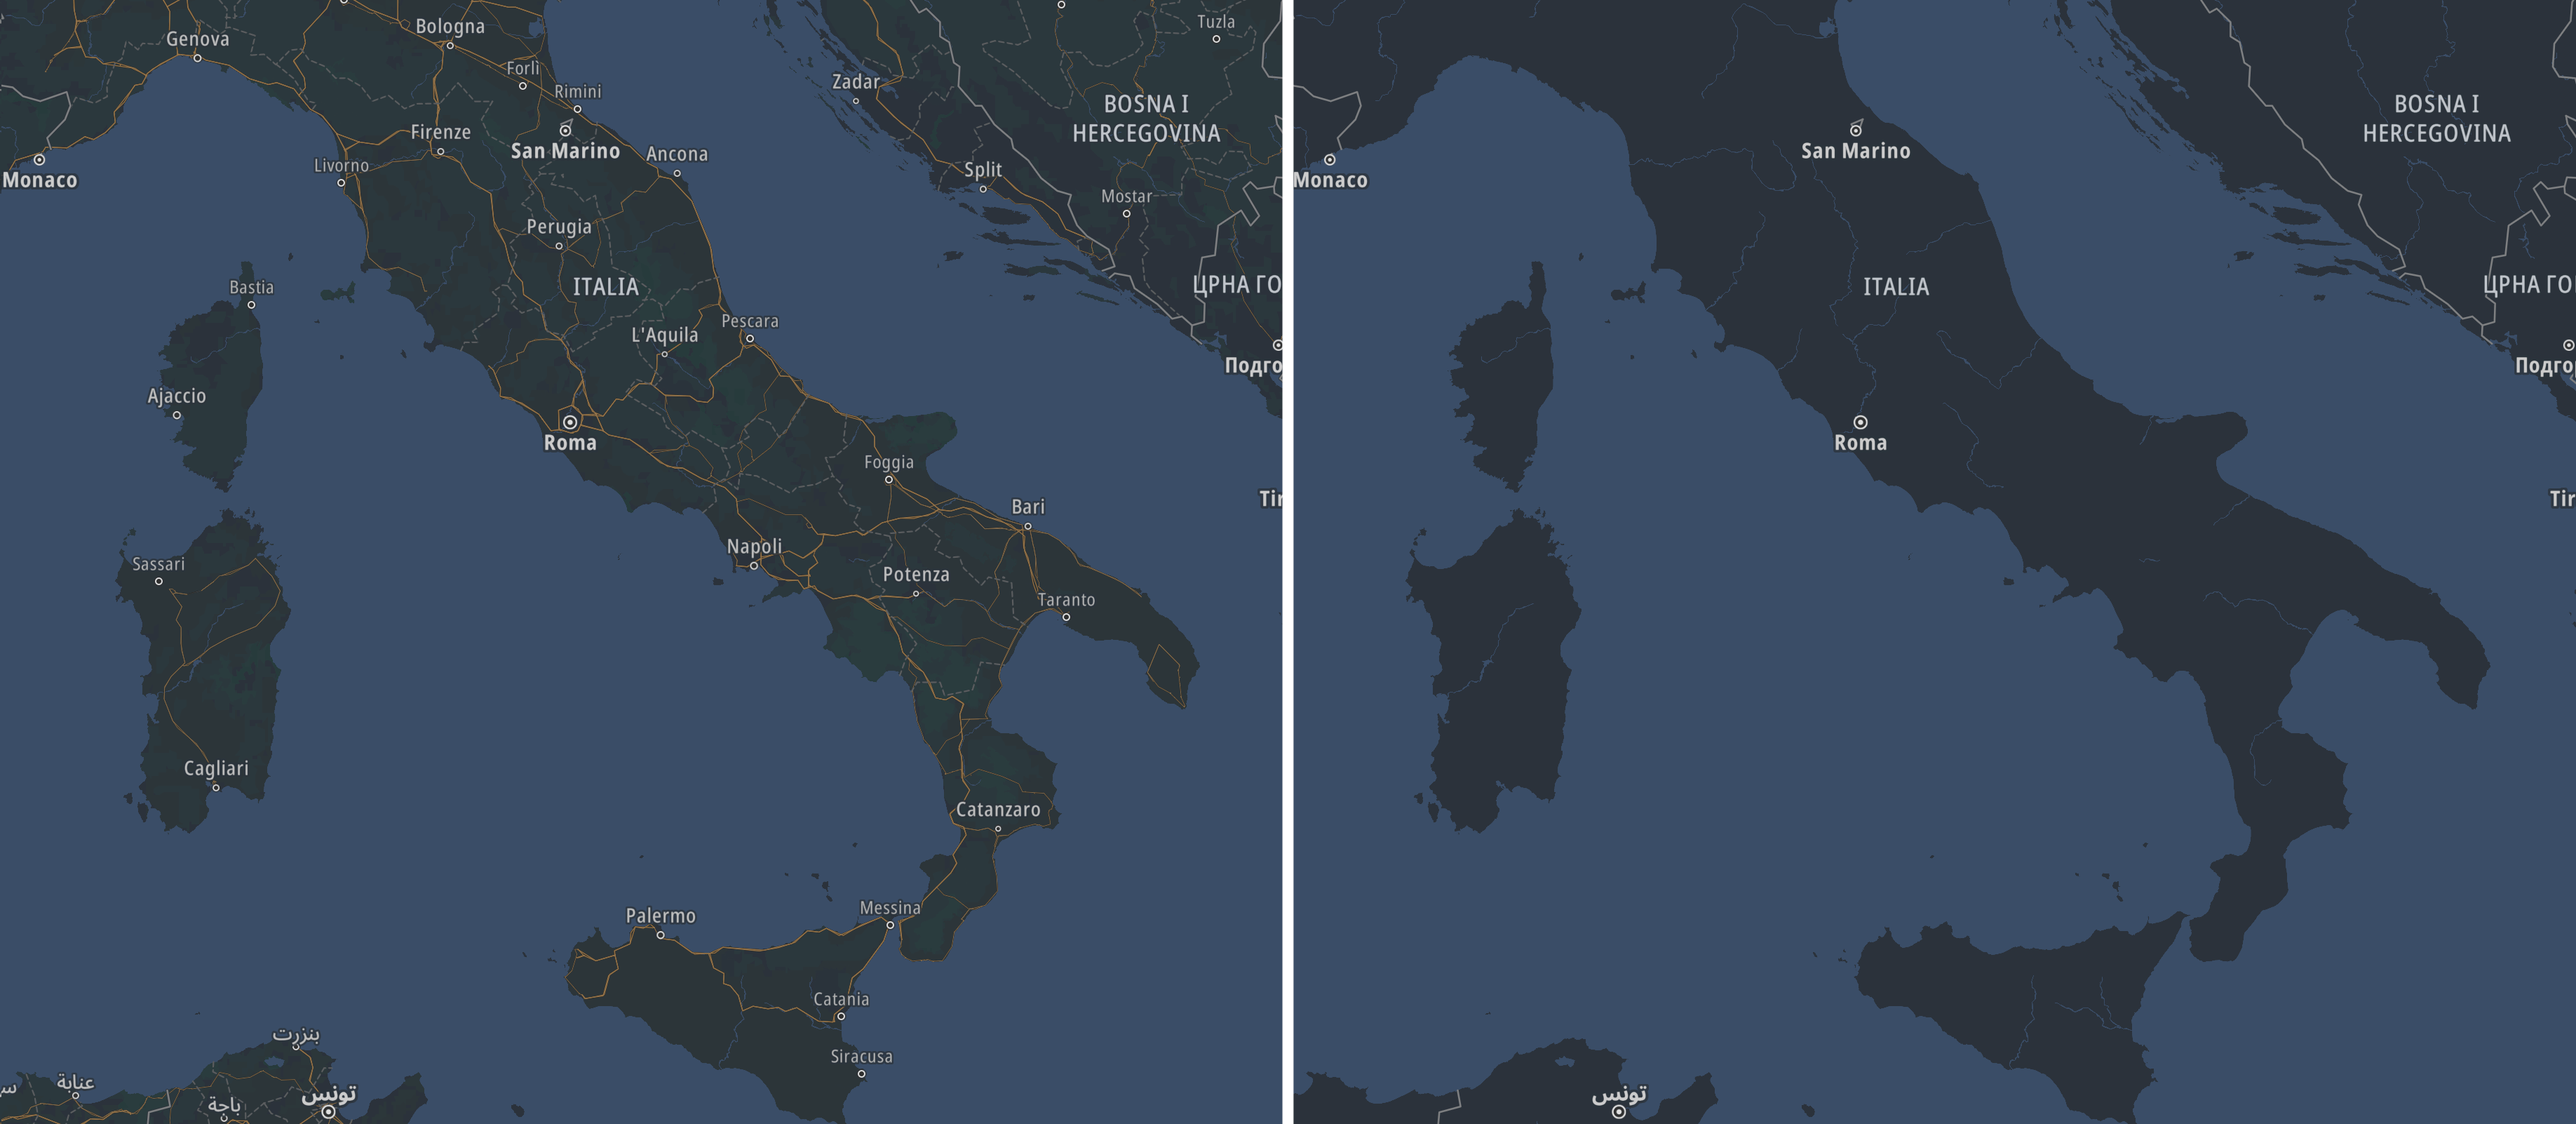 Maps with different visibility